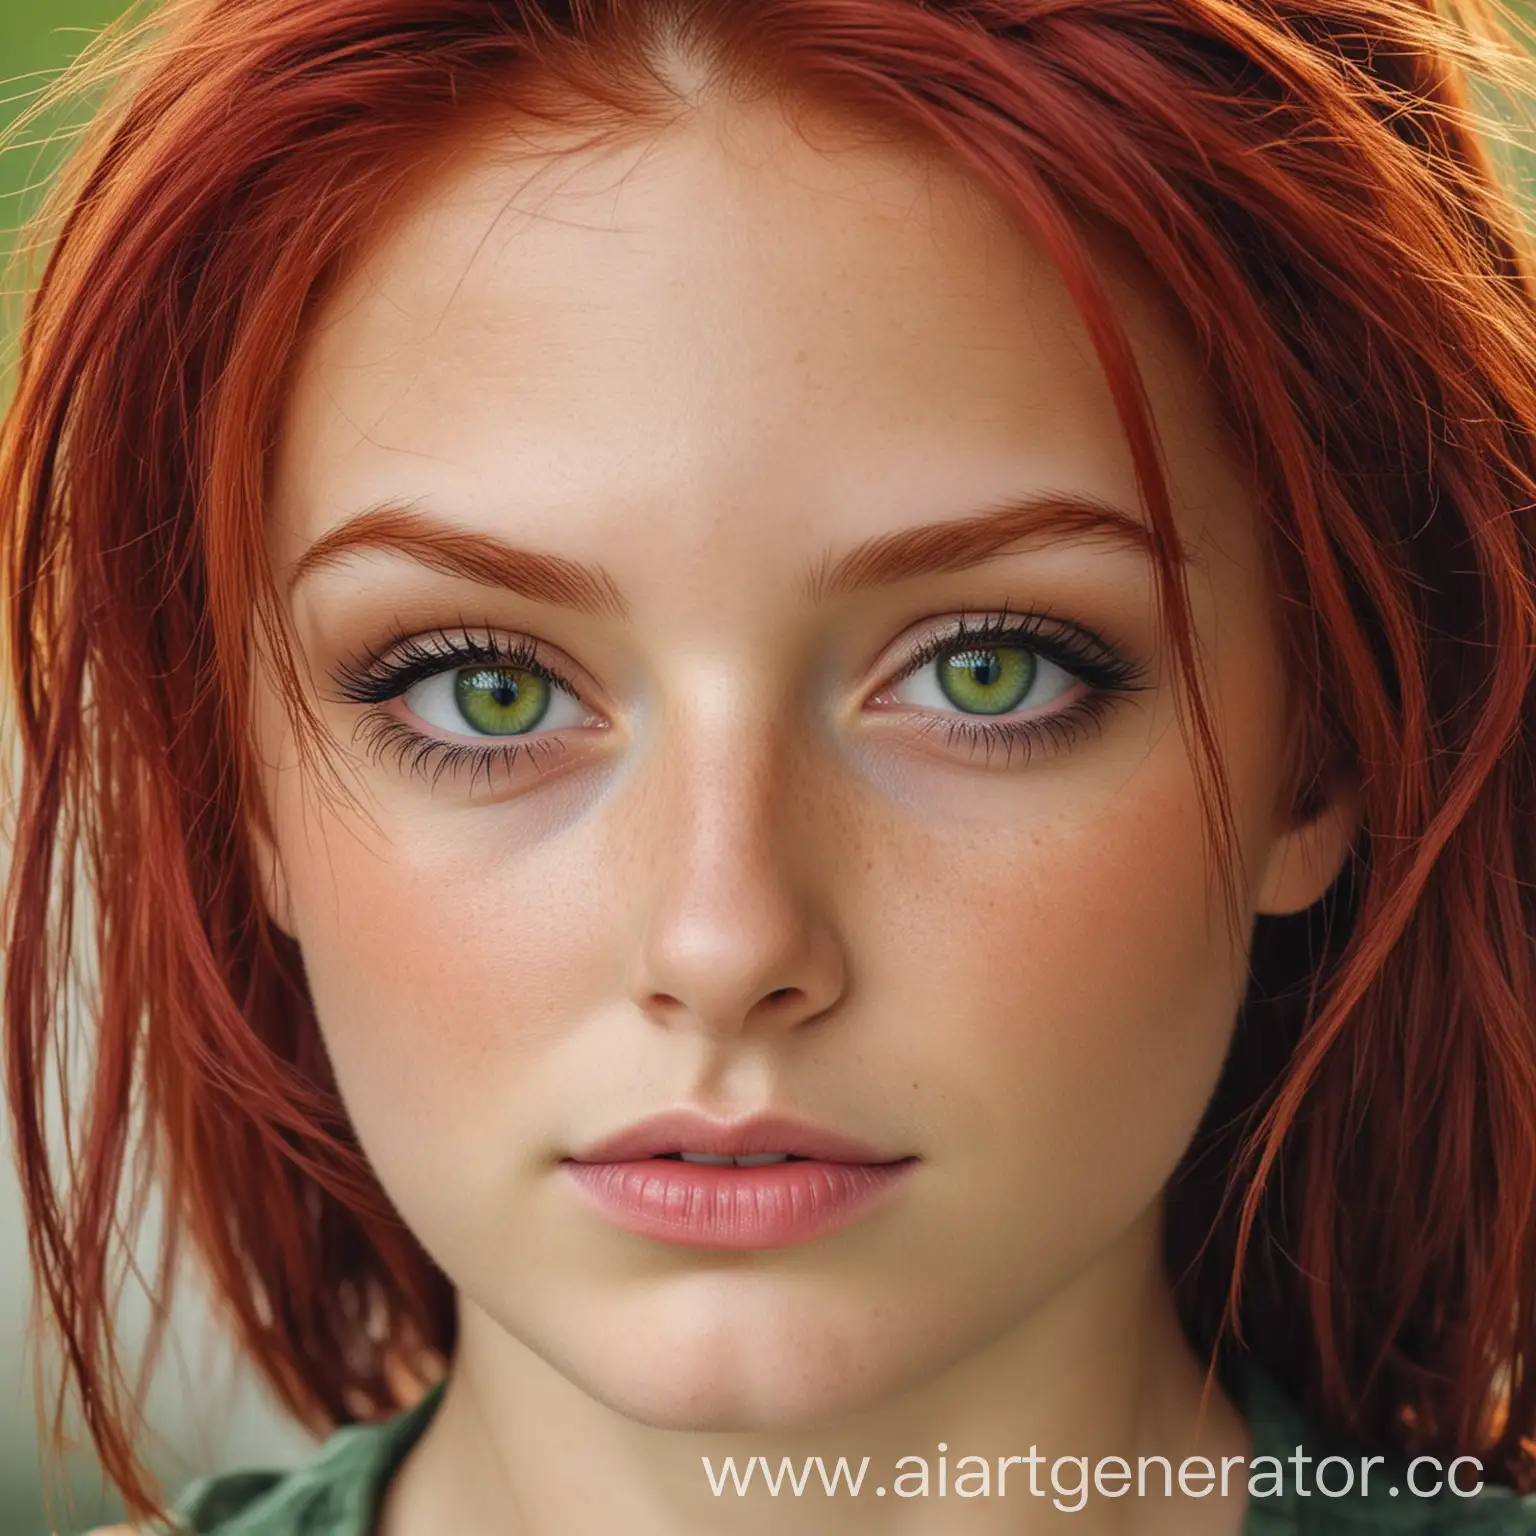 Romantic-Gesture-Expressing-Love-to-a-Beautiful-RedHaired-Woman-with-Green-Eyes